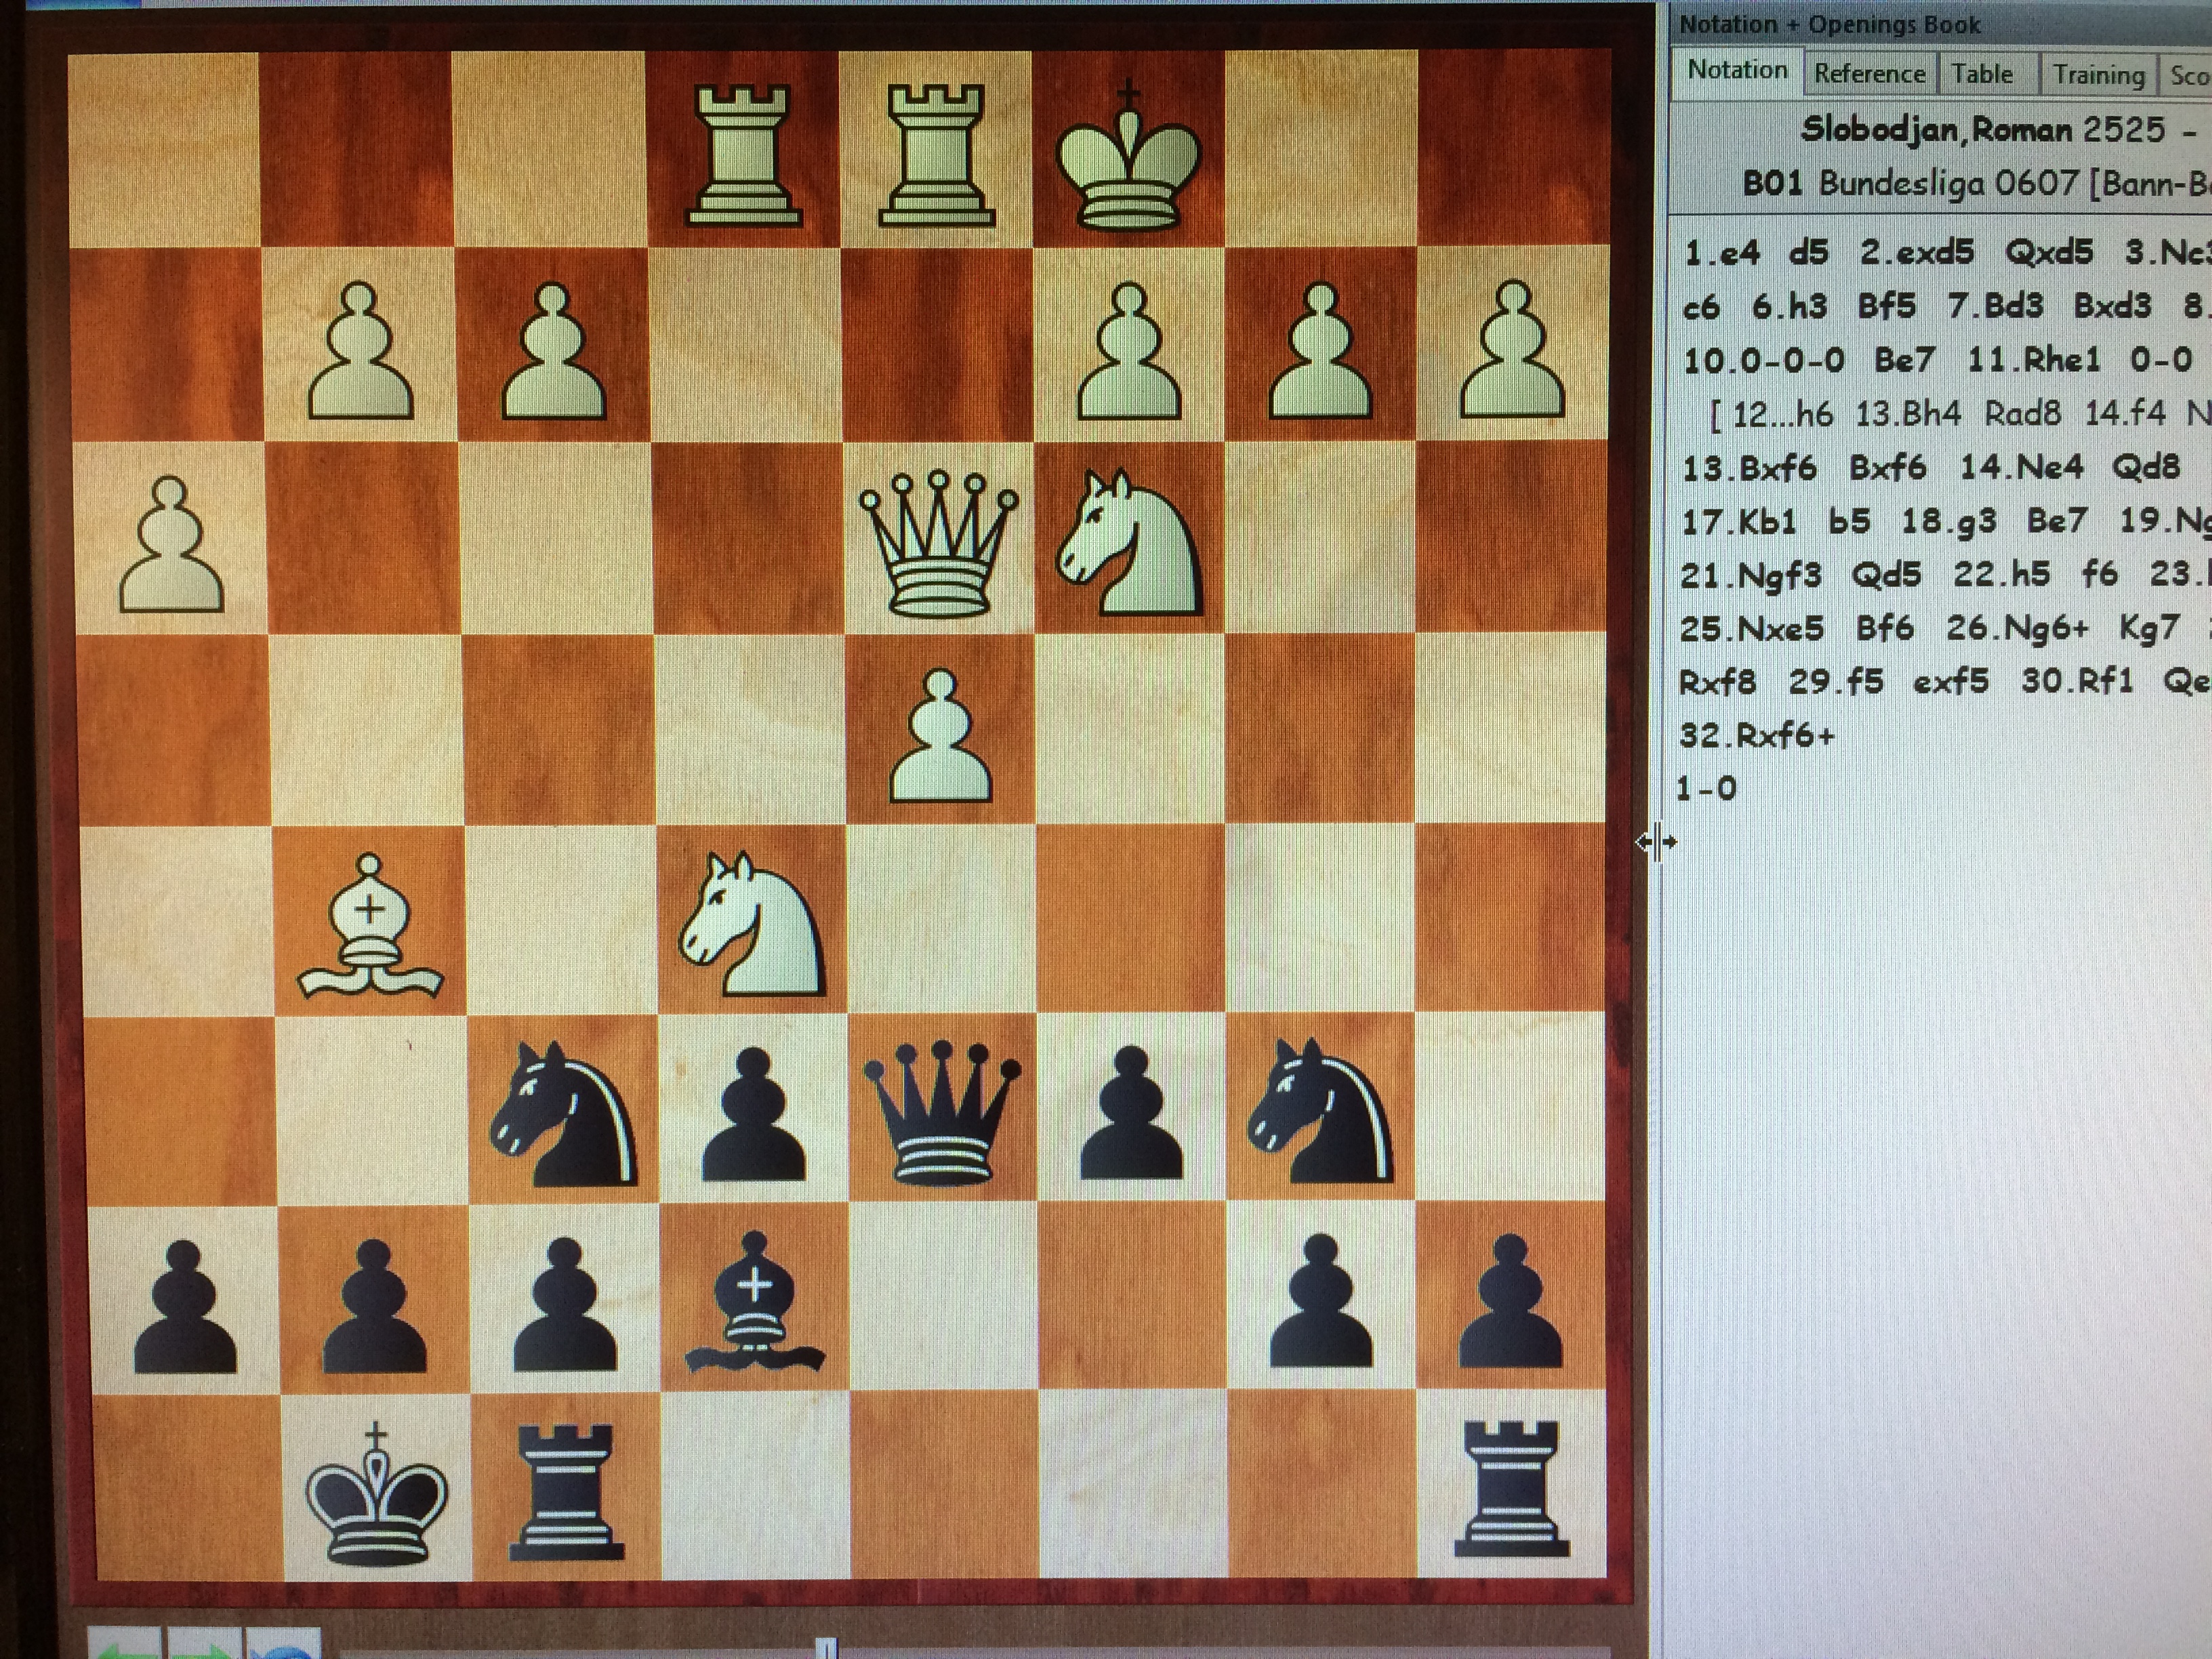 King's Indian 1 by Gawain Jones, Opening chess book by Quality Chess